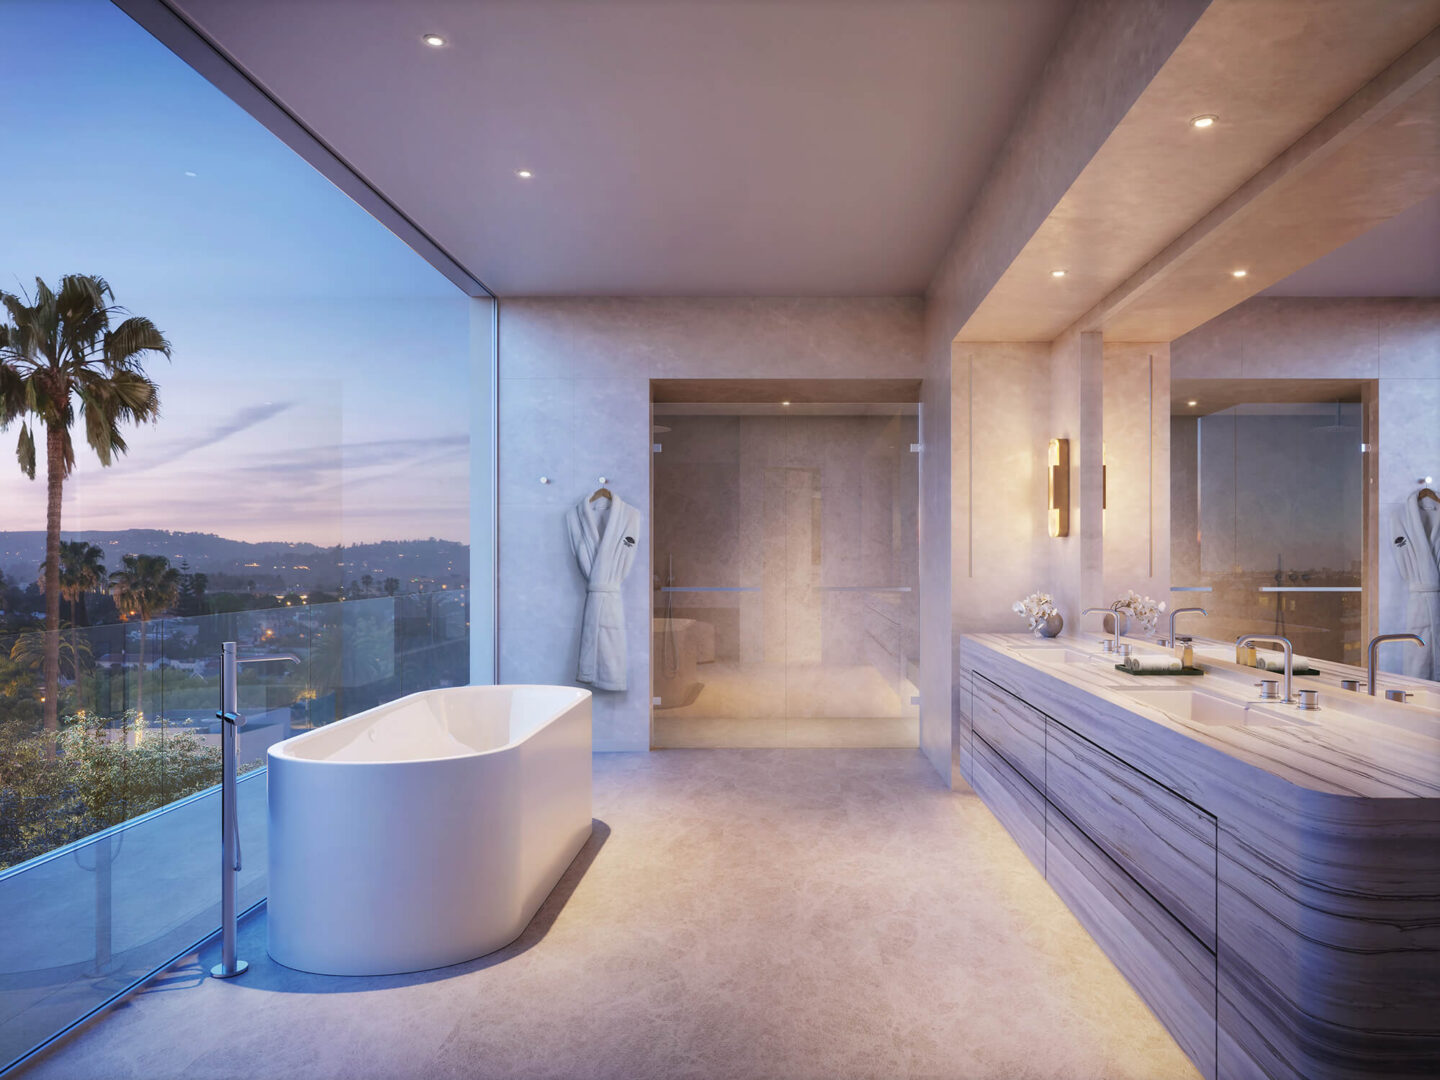 rendering of a bathroom at the mandarin oriental beverlay hills. cream colored amentieis and floor to ceiling windows overlooking beverly hills